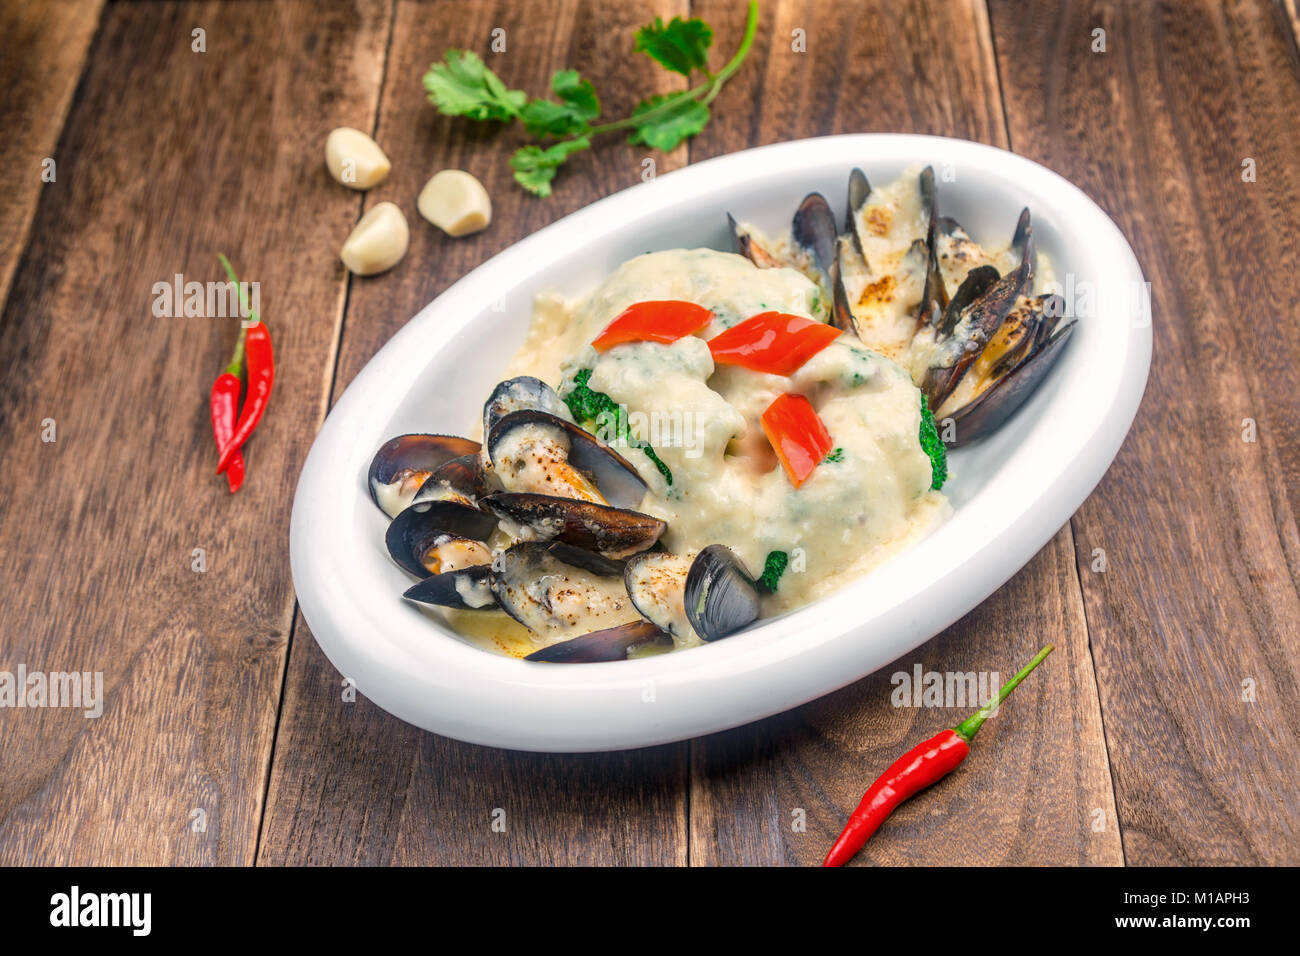 Baked rice with seafood Stock Photo